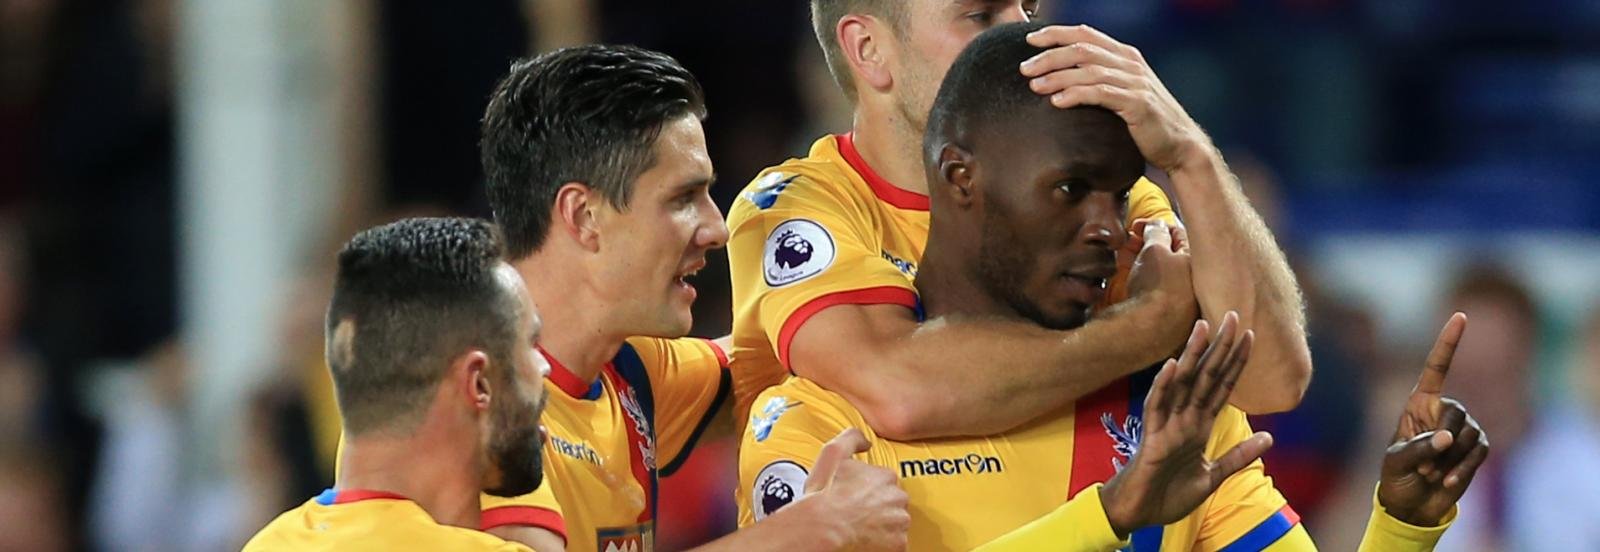 Watch: Crystal Palace hitman bags record breaking goal in sensational performance